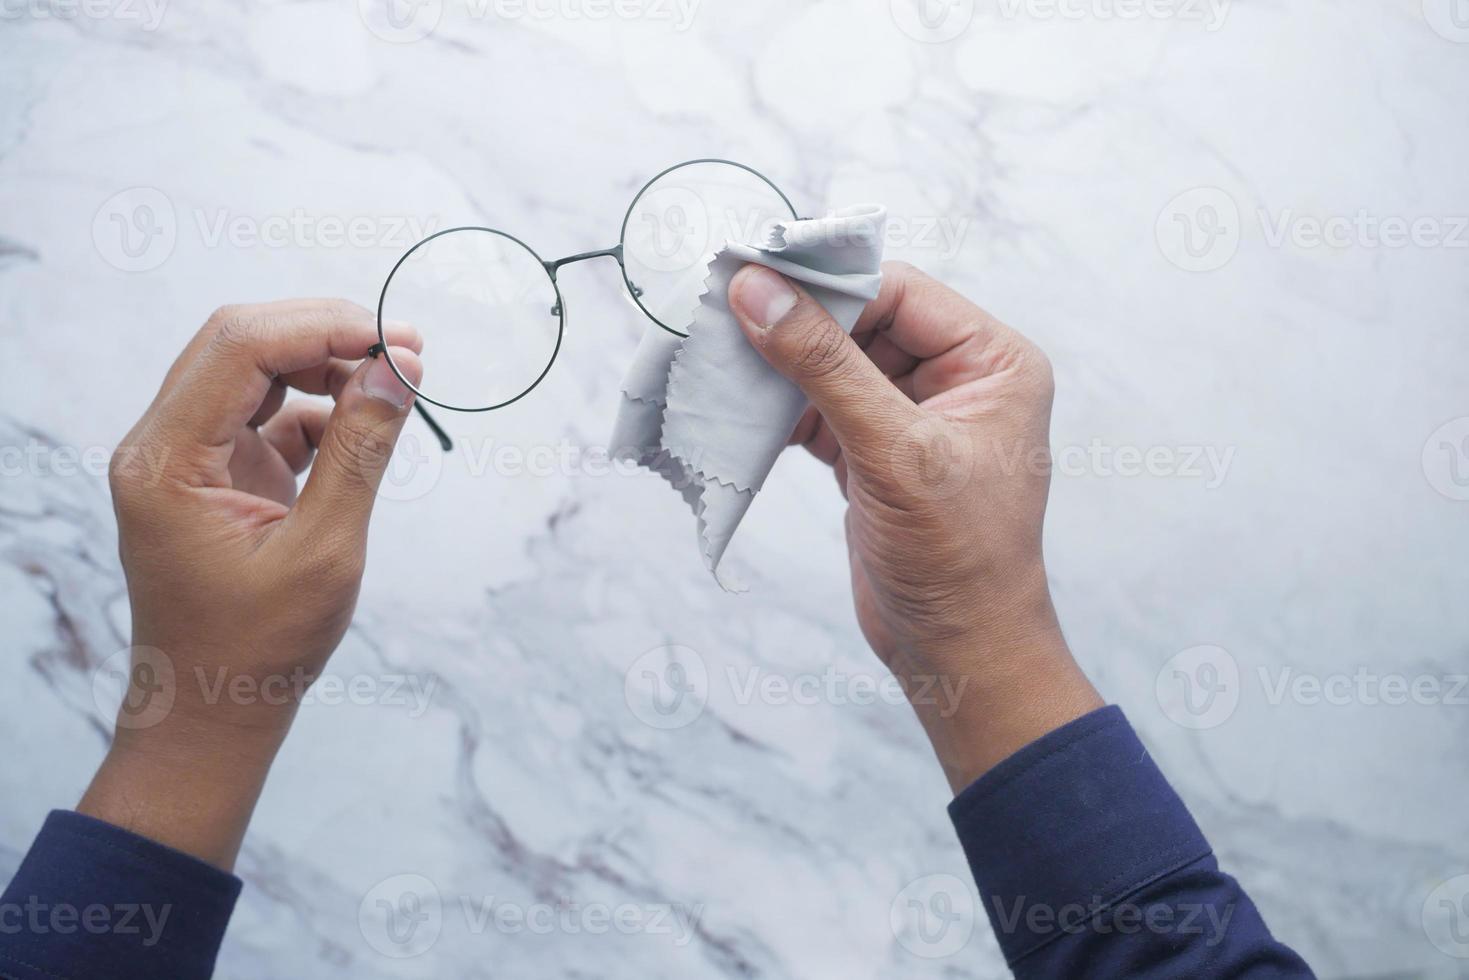 cleaning eyeglass with tissue close up photo